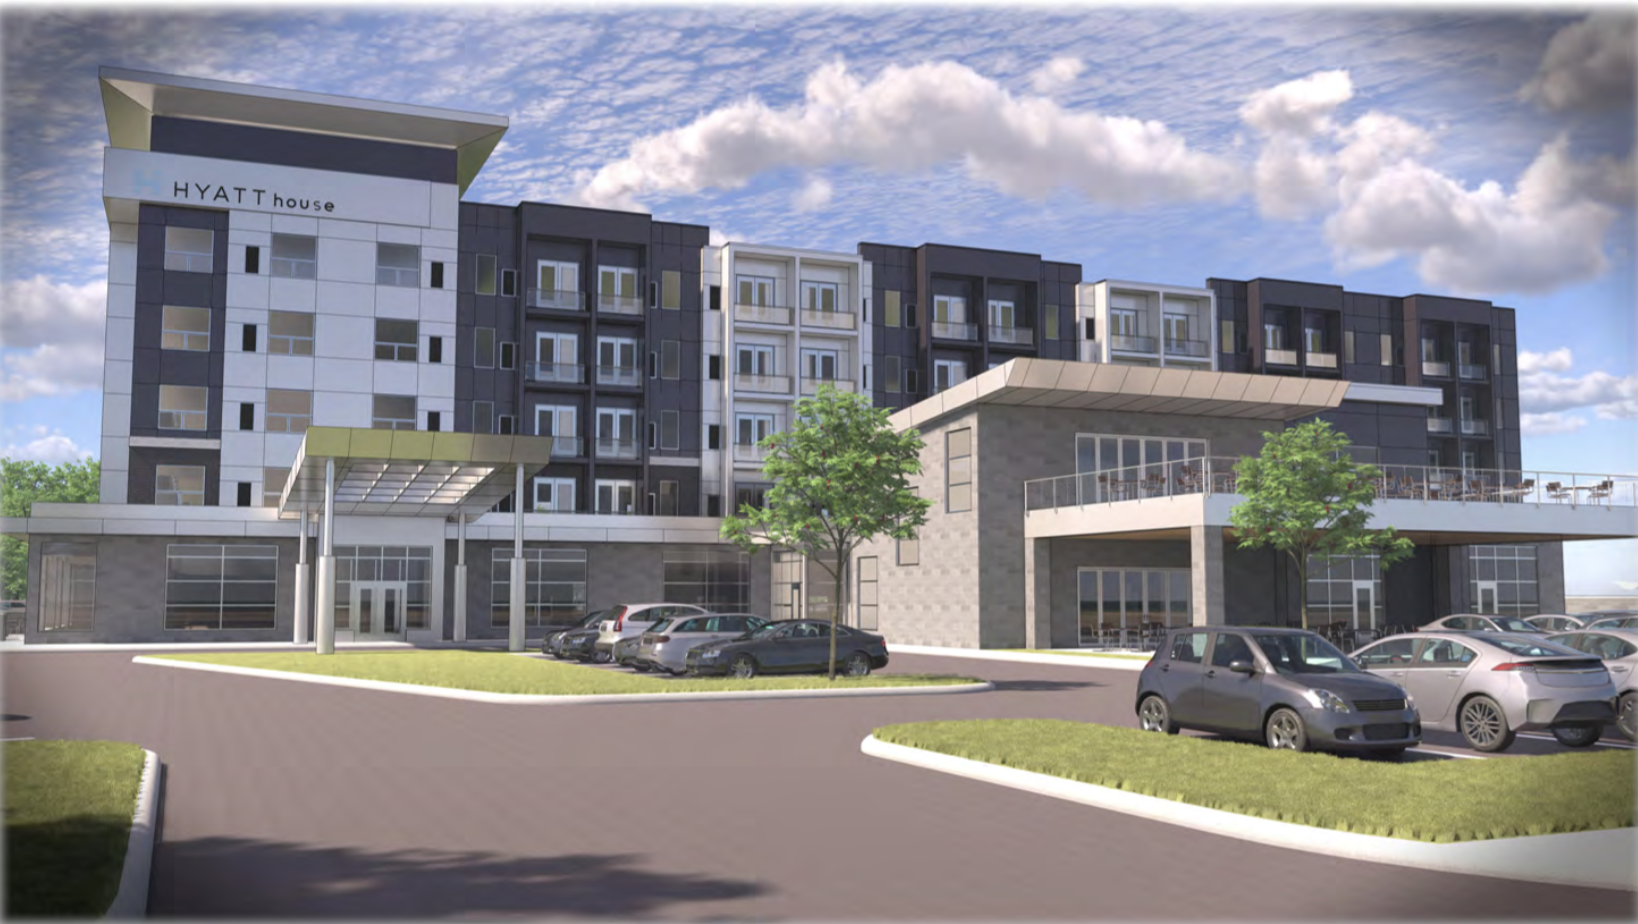 Hyatt House Latest In Line Of New Hotels Planned For East Bay Township